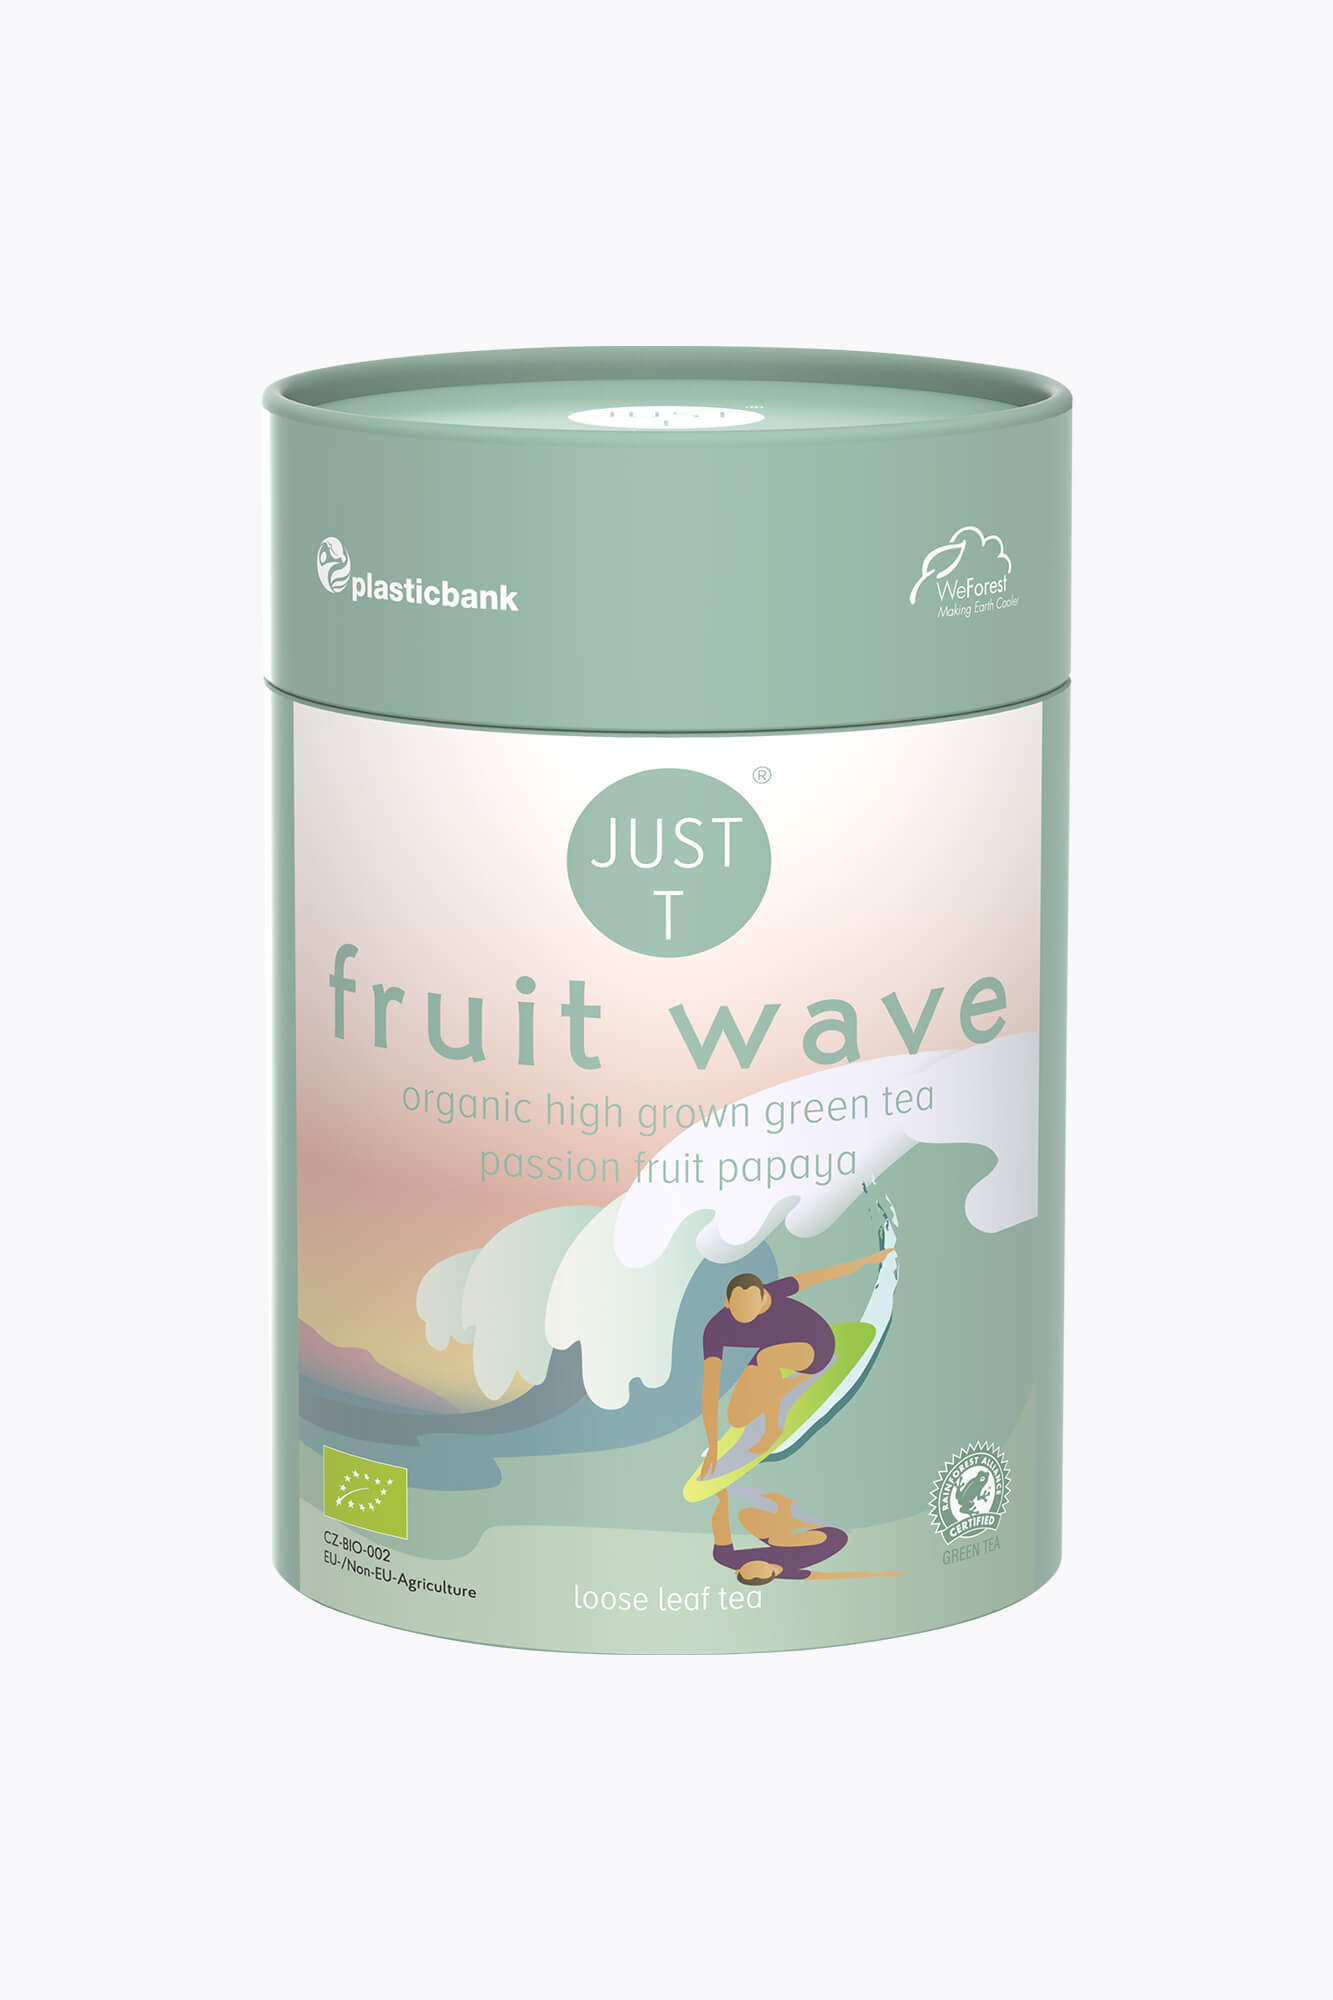 Just T Fruit Wave 125g loser Tee